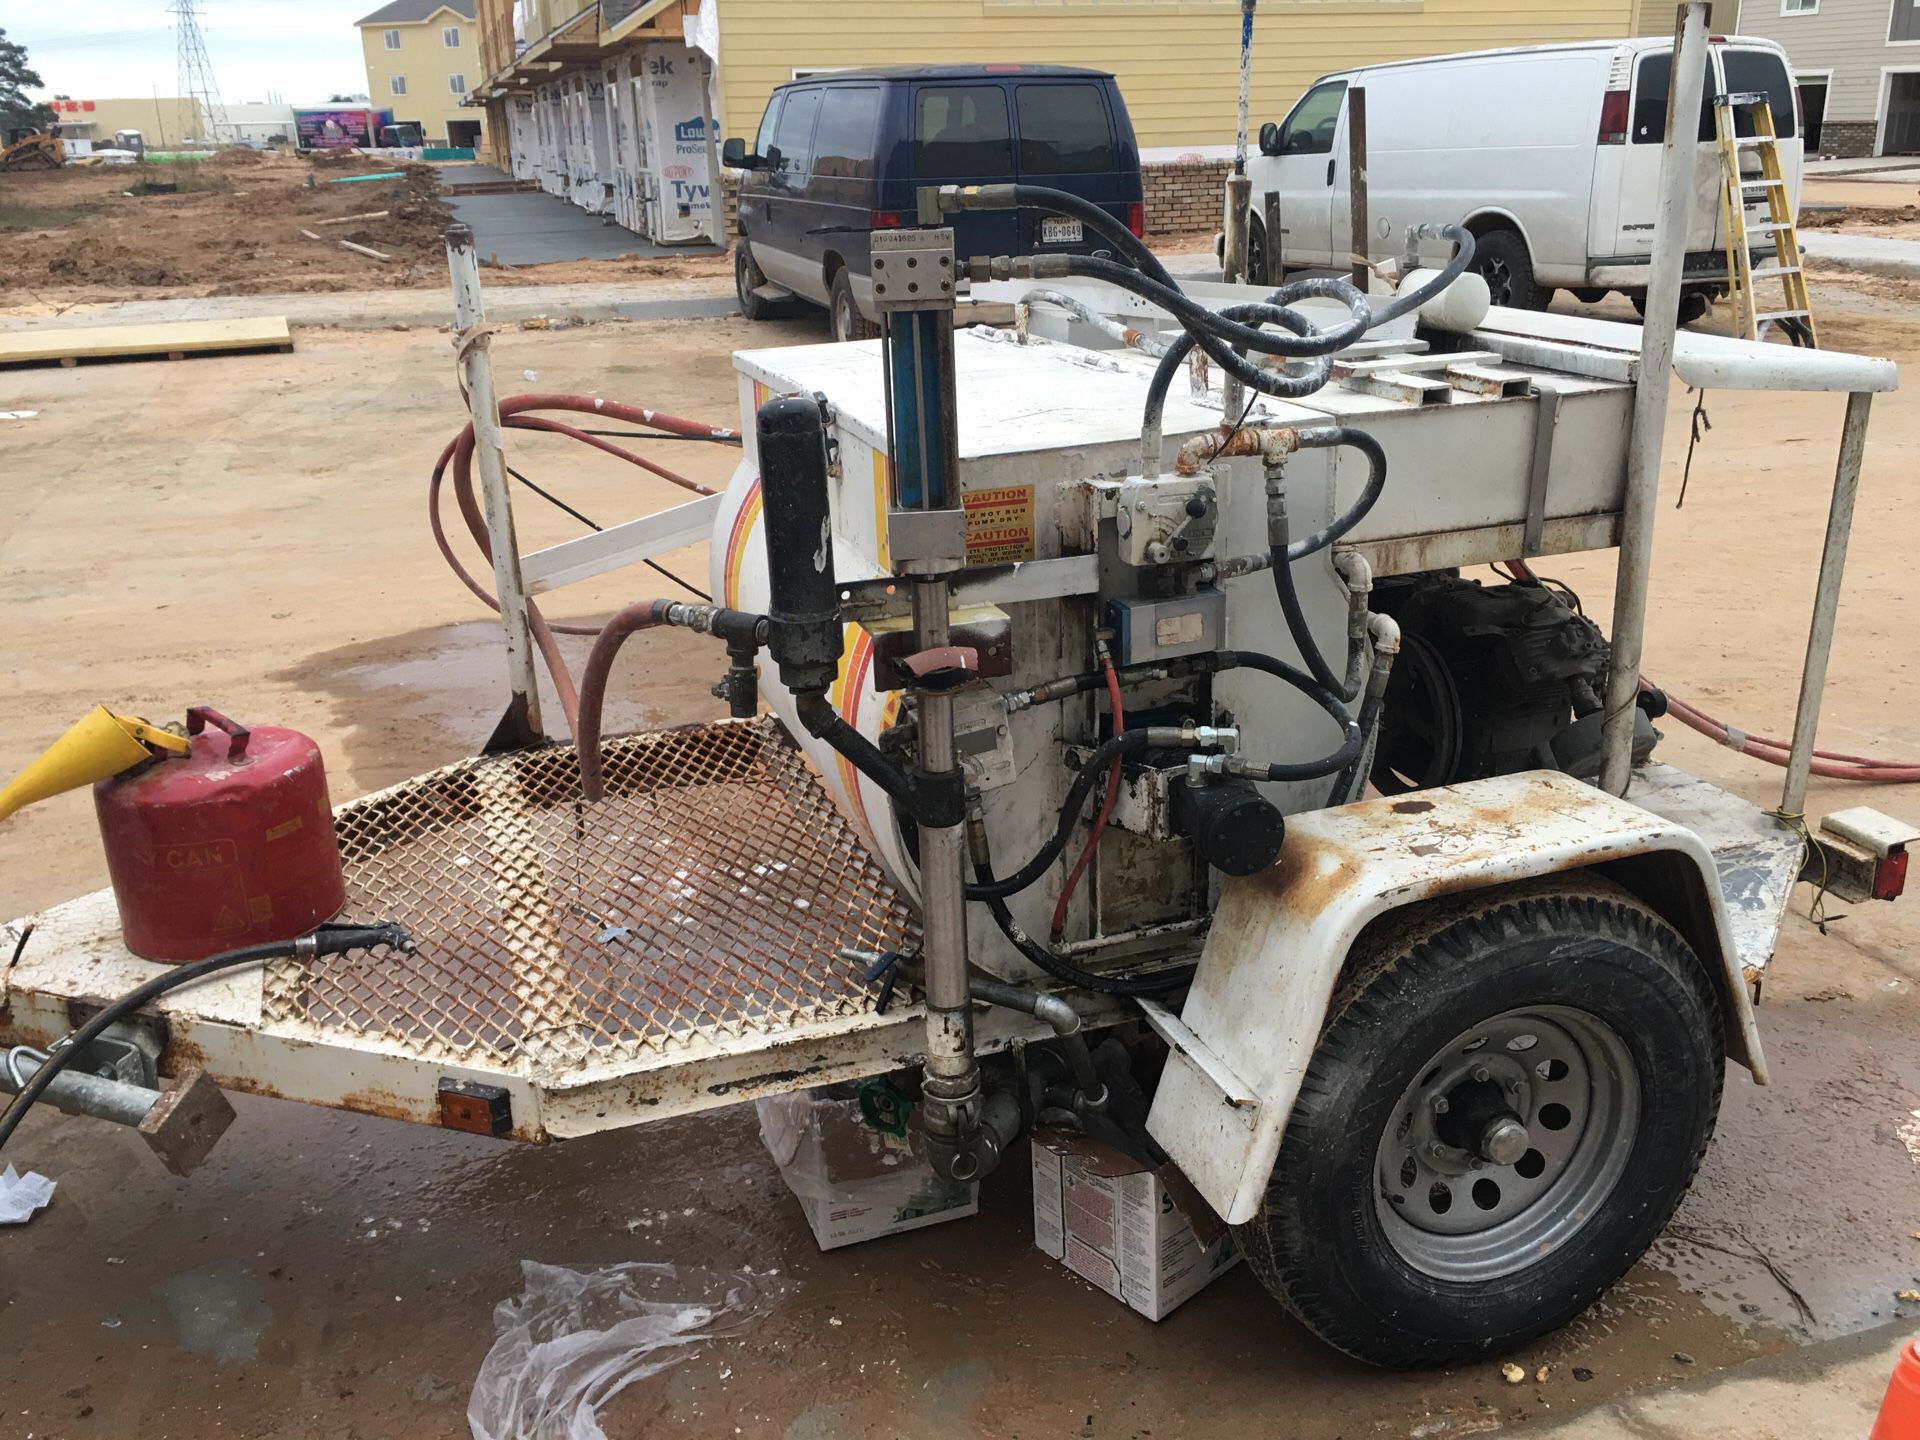 Maquina for Sale in TX - OfferUp